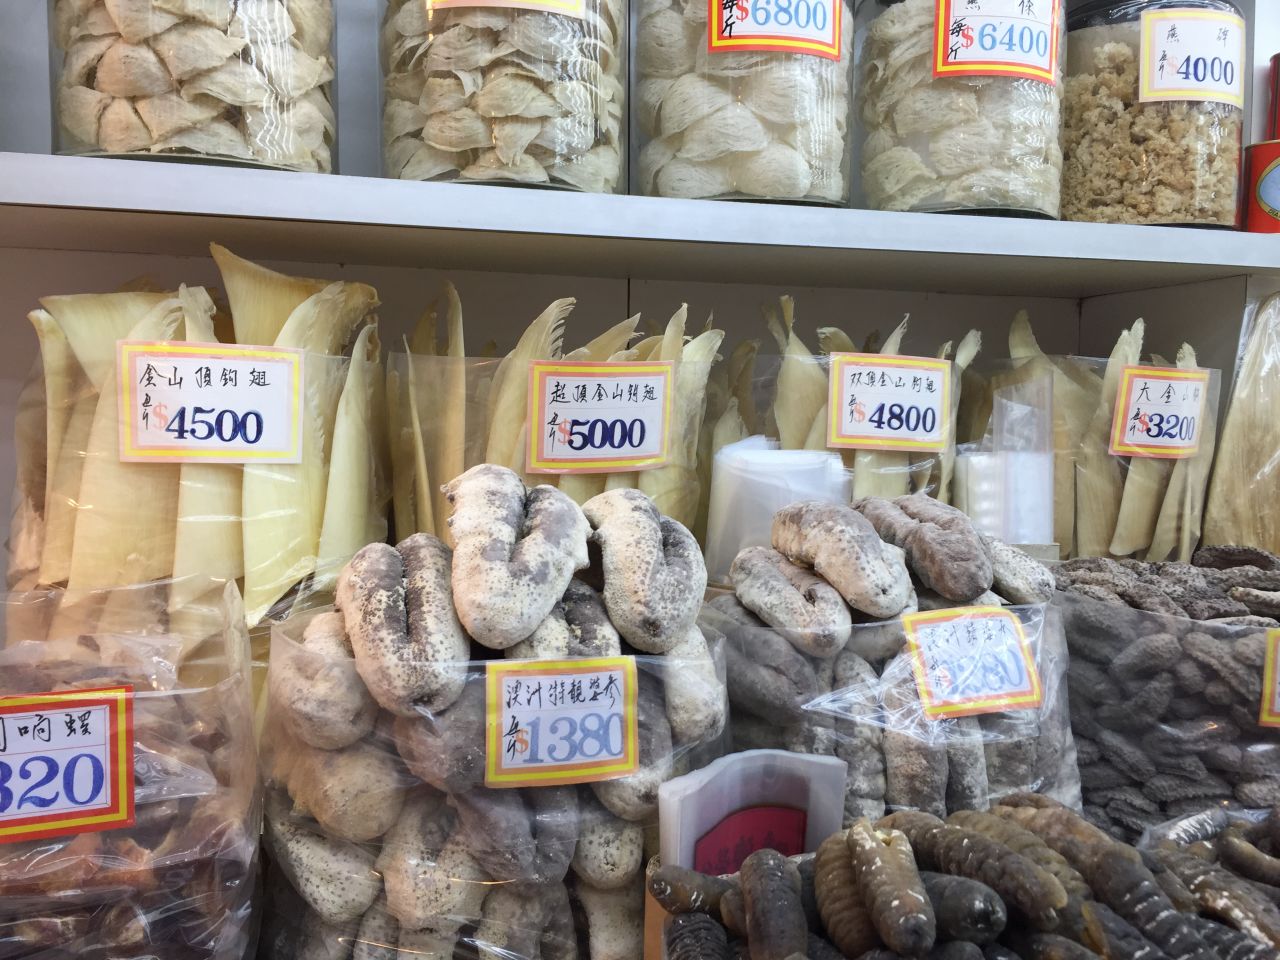 Hong Kong's Dried Seafood Market offers all sorts of varieties, including shark fin and sea cucumber.